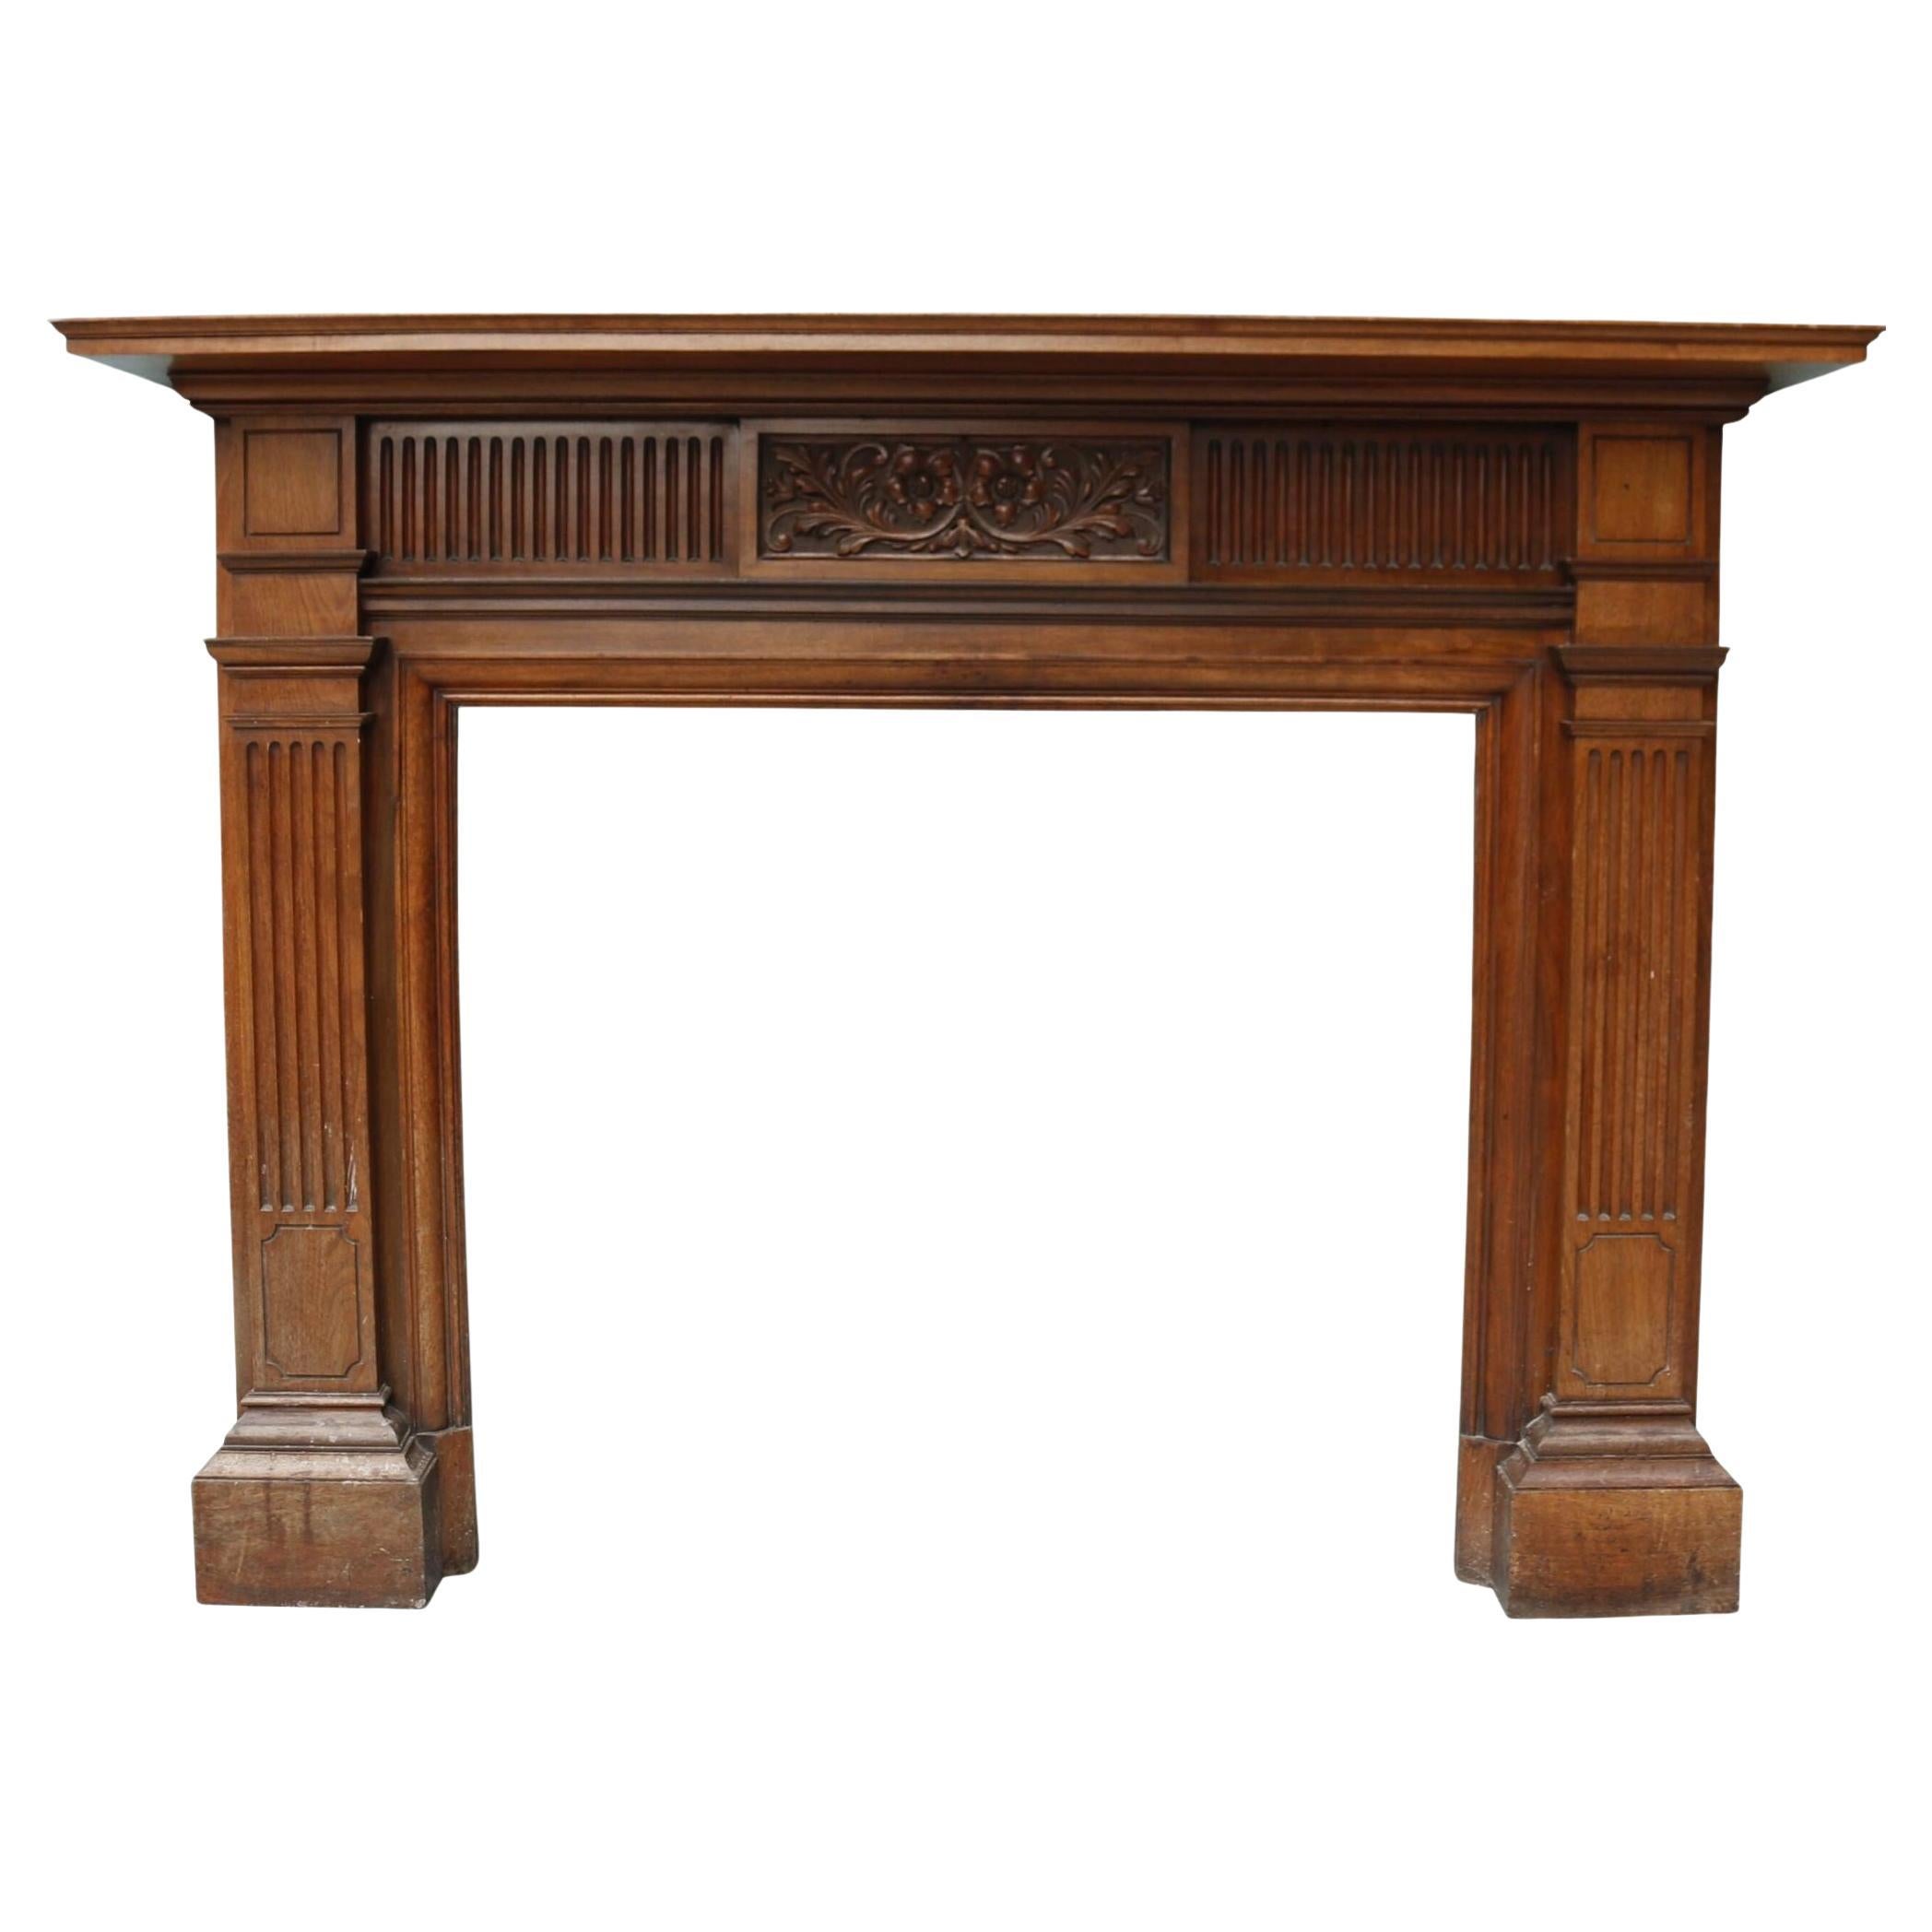 Antique Victorian Carved Timber Fire Mantel For Sale